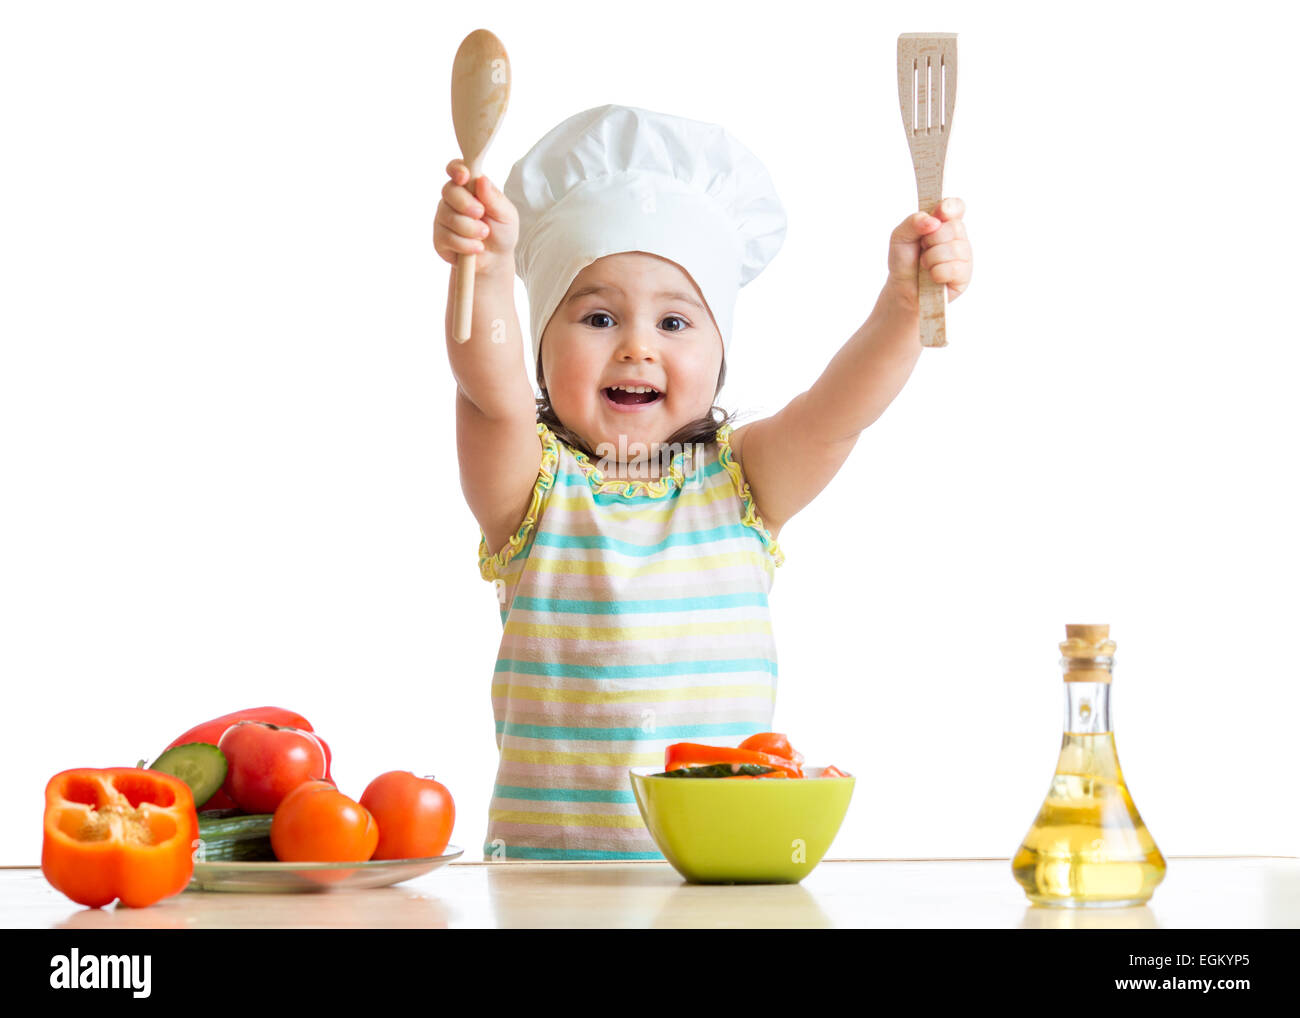 Smiling little cook with ladle, isolated on white Stock Photo